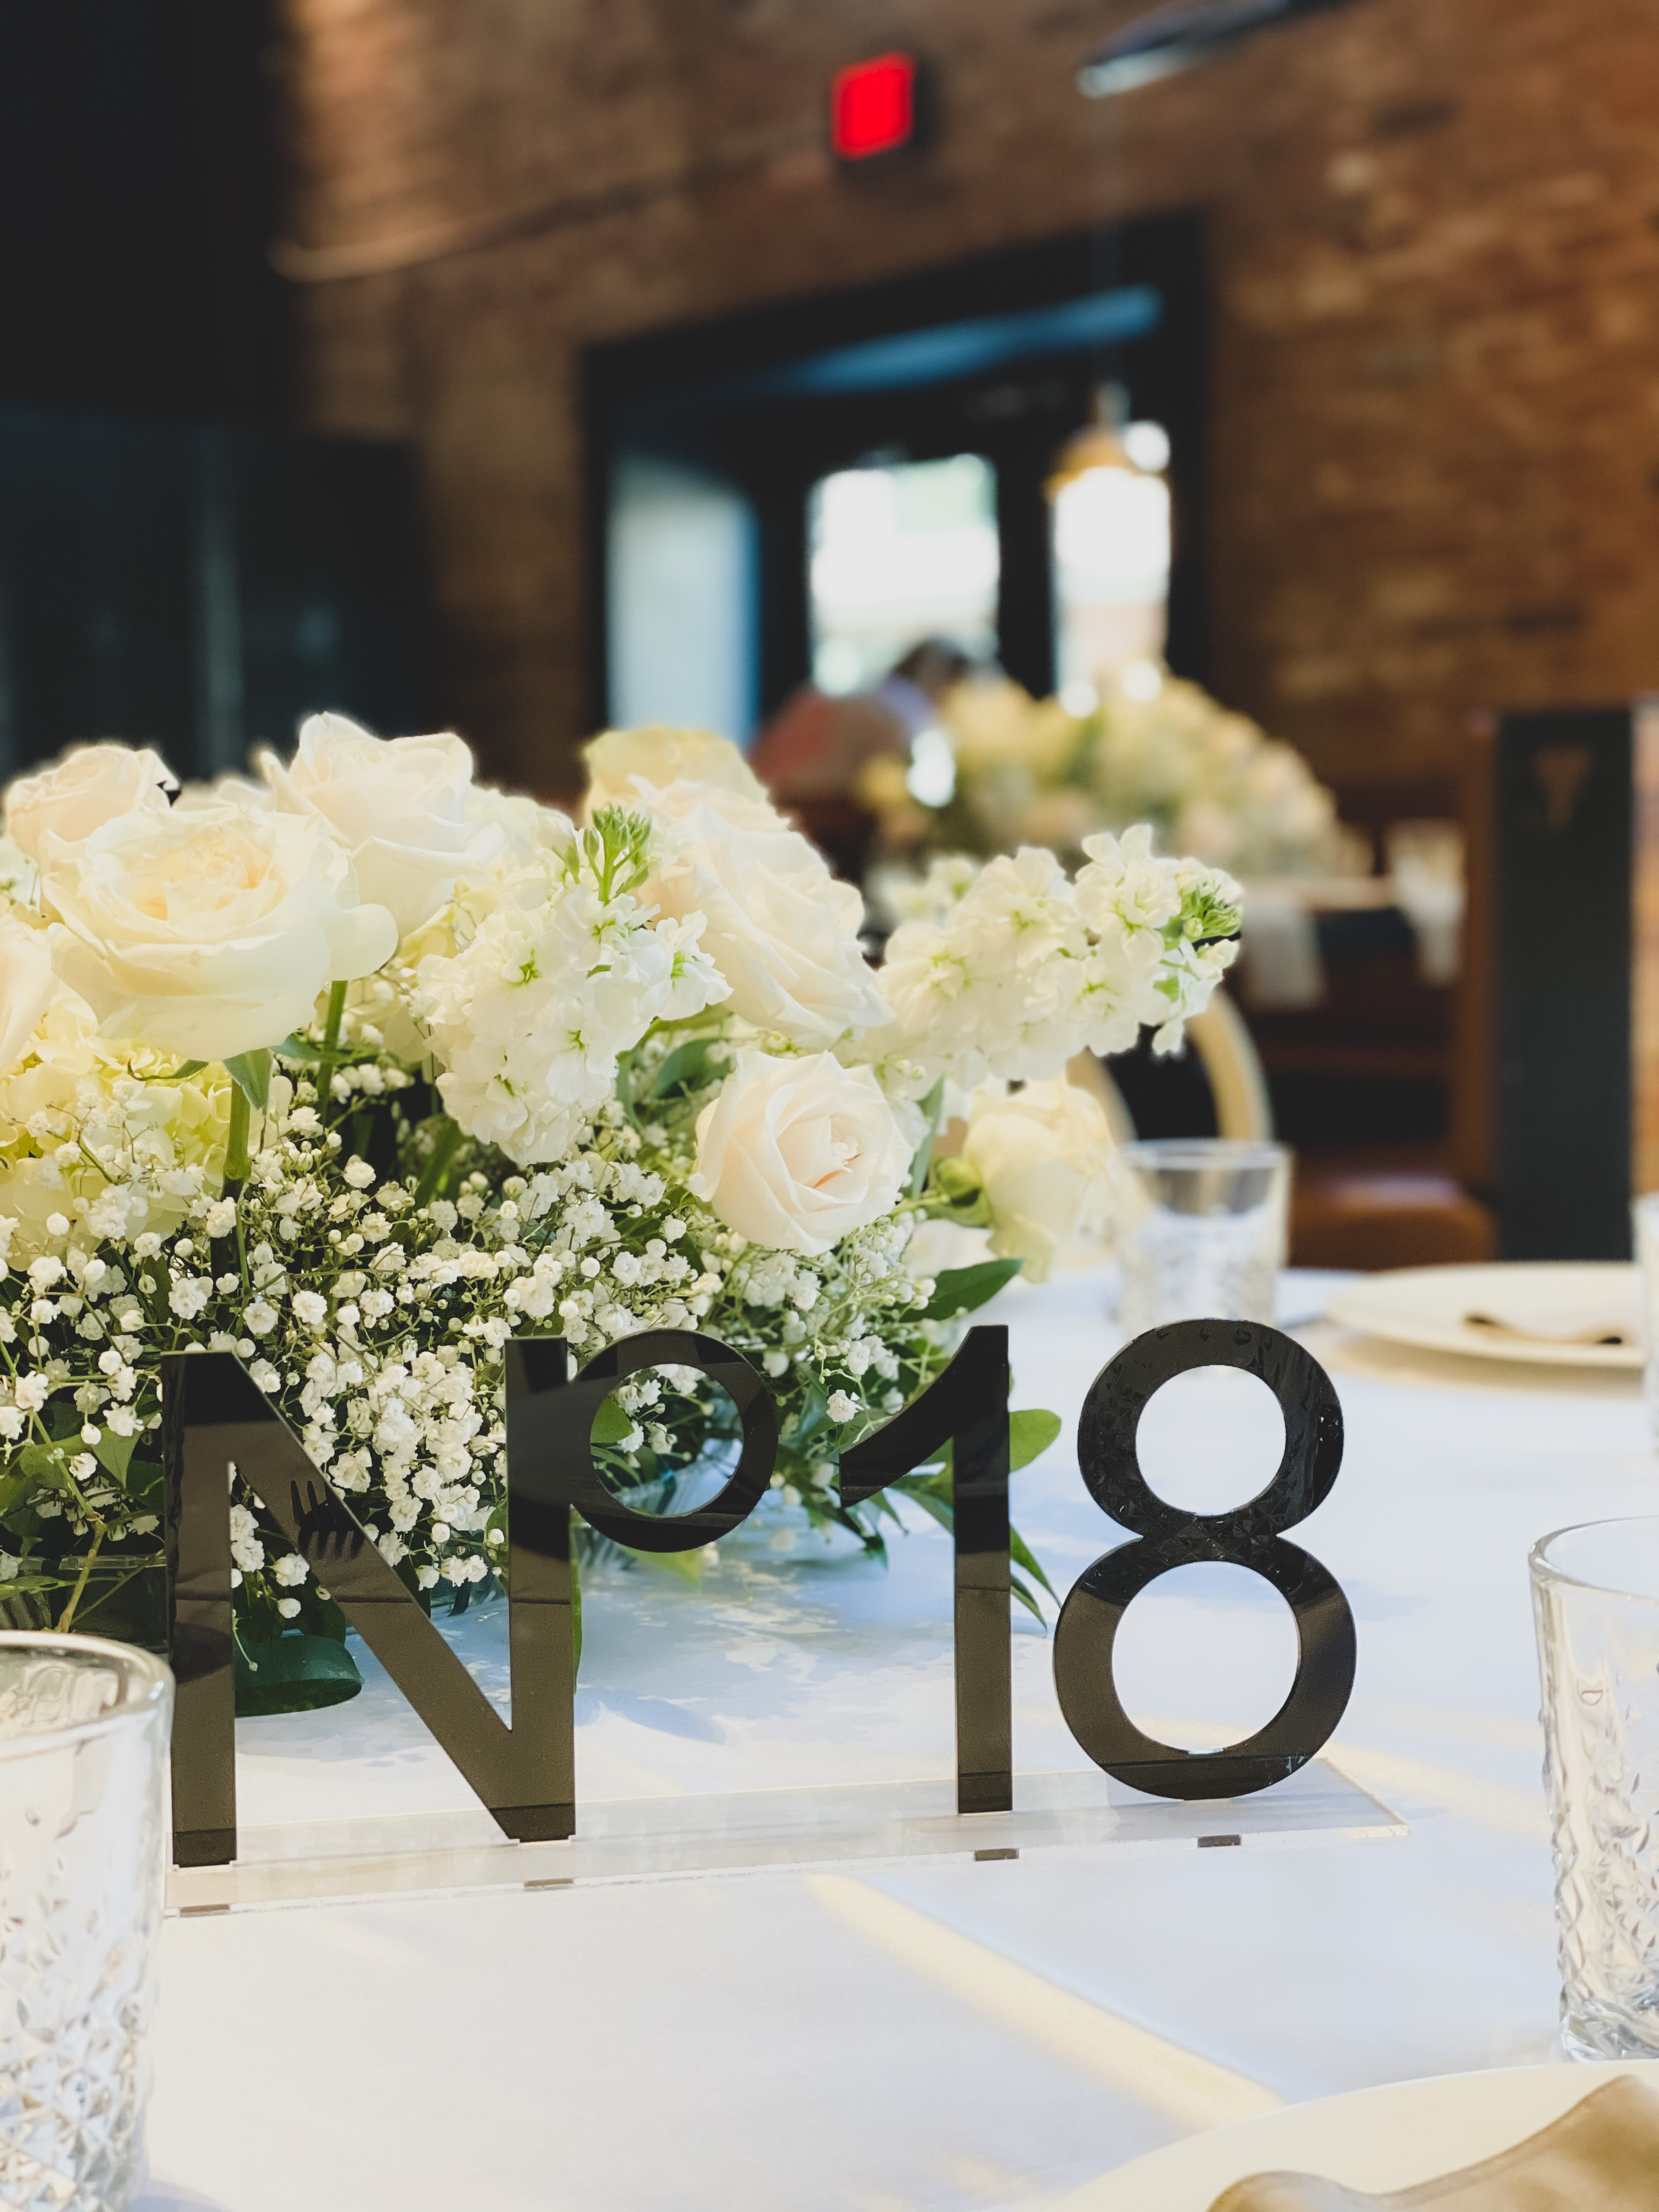 [HIRE/RENTAL] 'LUX' Table Numbers